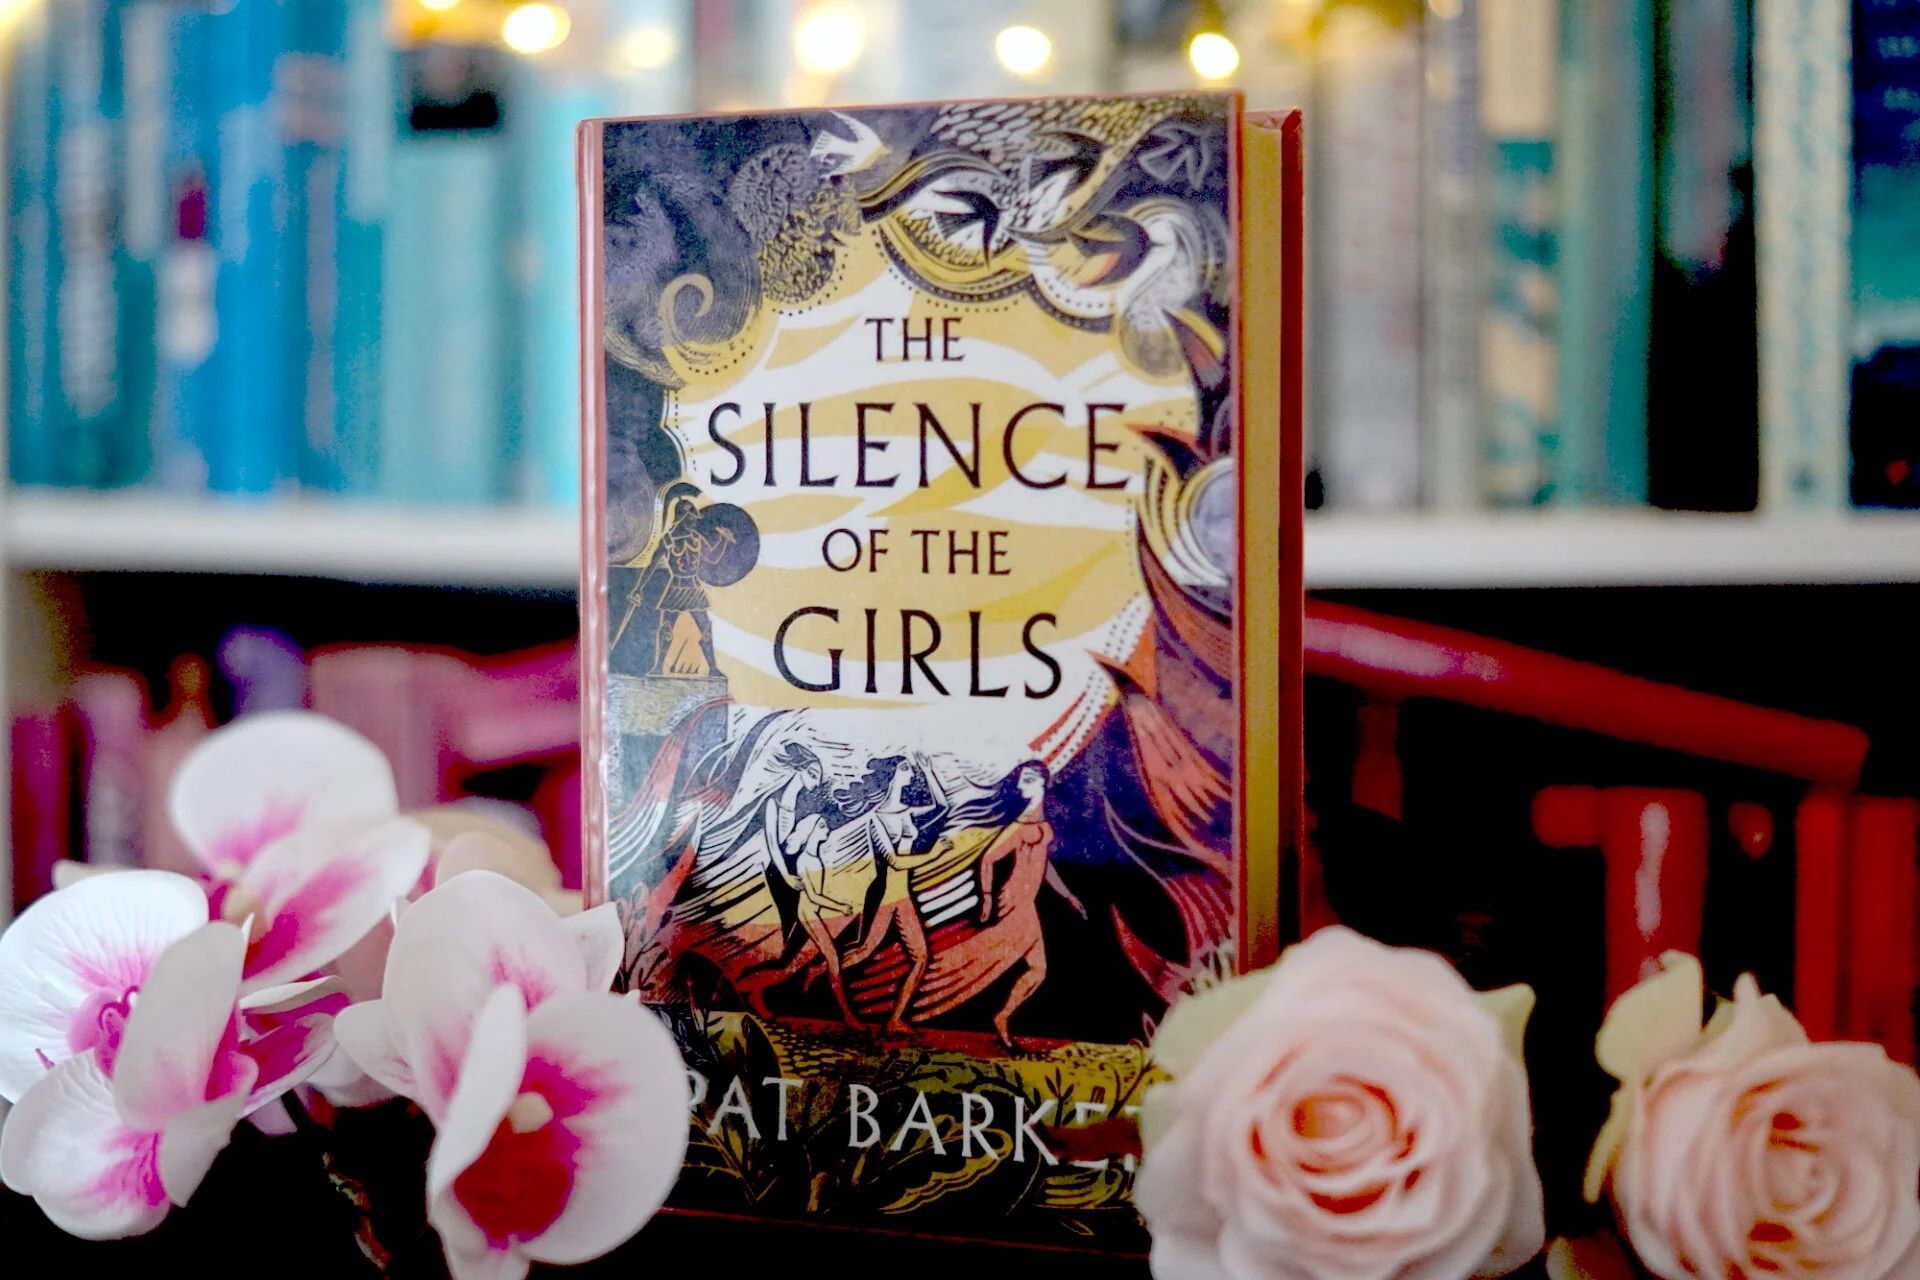 15-extraordinary-facts-about-the-silence-of-the-girls-pat-barker